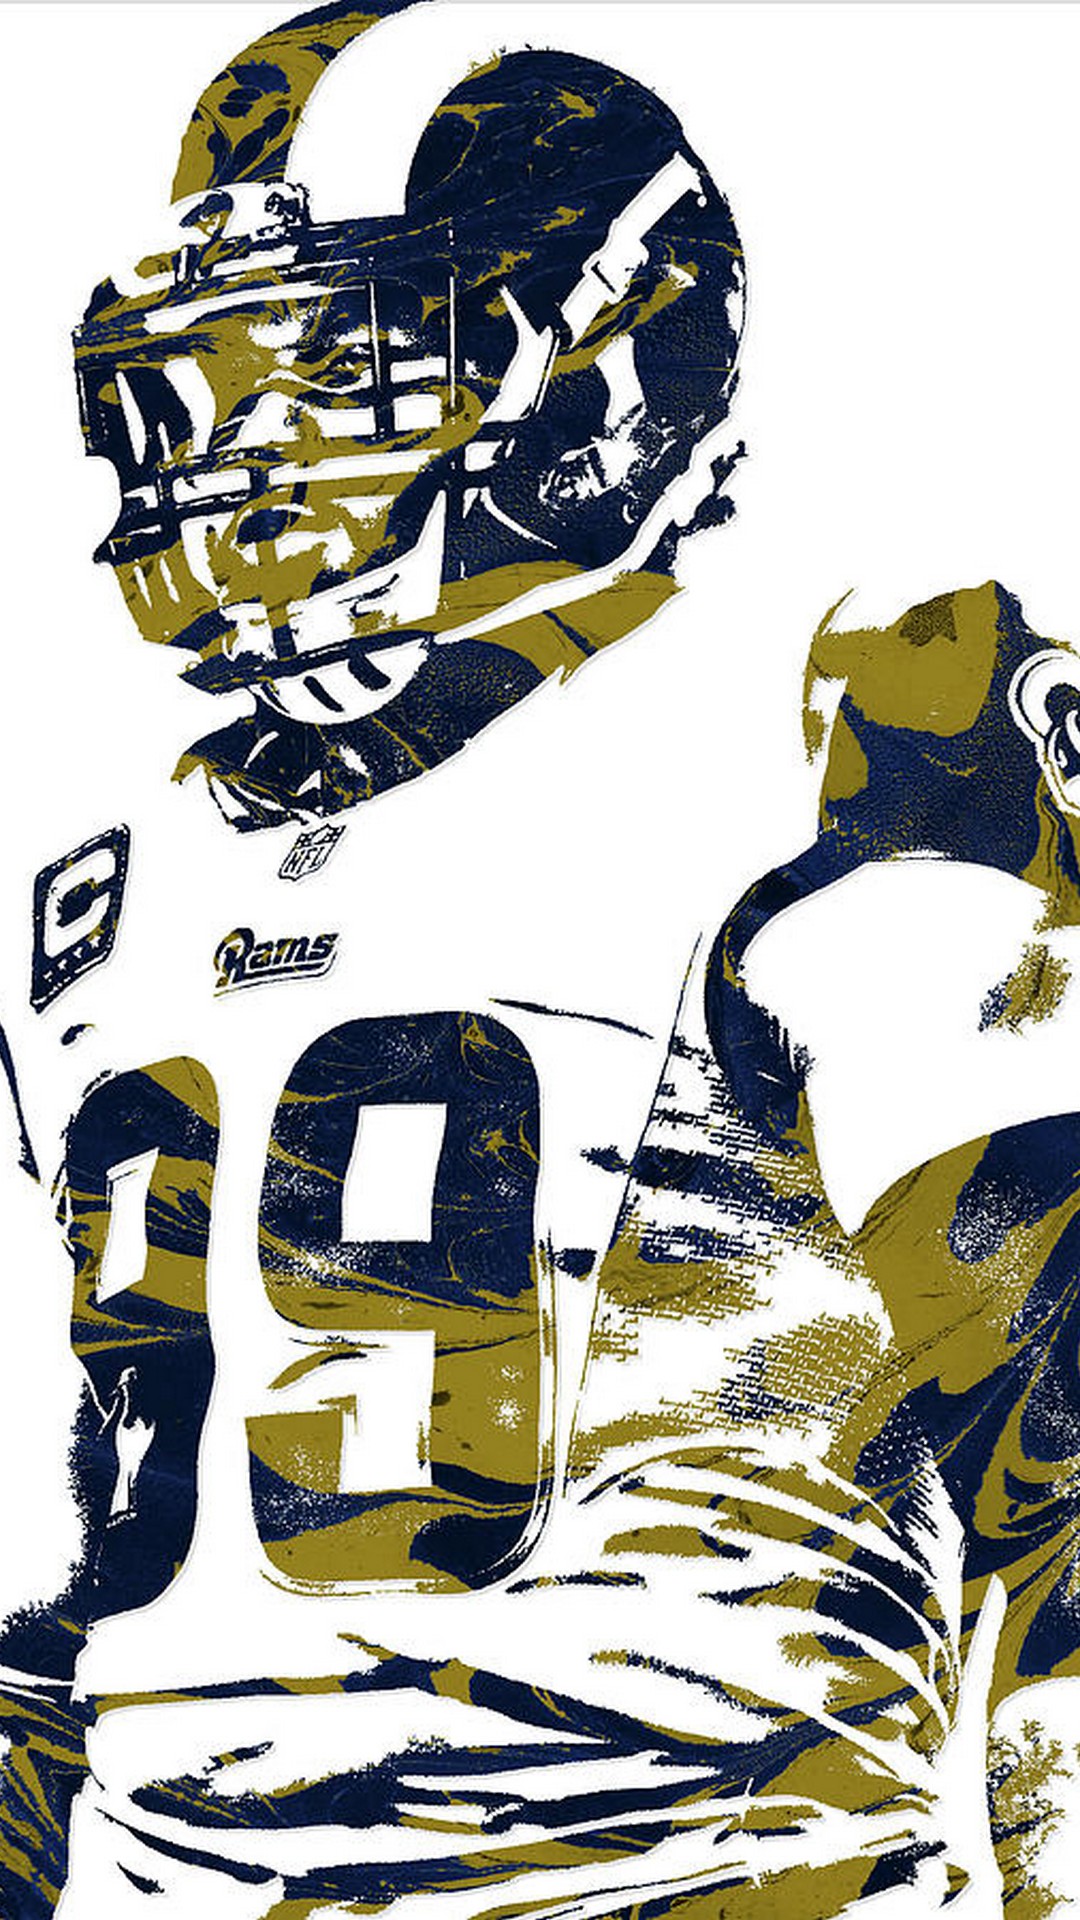 Los Angeles Rams iPhone Wallpaper Tumblr with high-resolution 1080x1920 pixel. Download and set as wallpaper for Desktop Computer, Apple iPhone X, XS Max, XR, 8, 7, 6, SE, iPad, Android